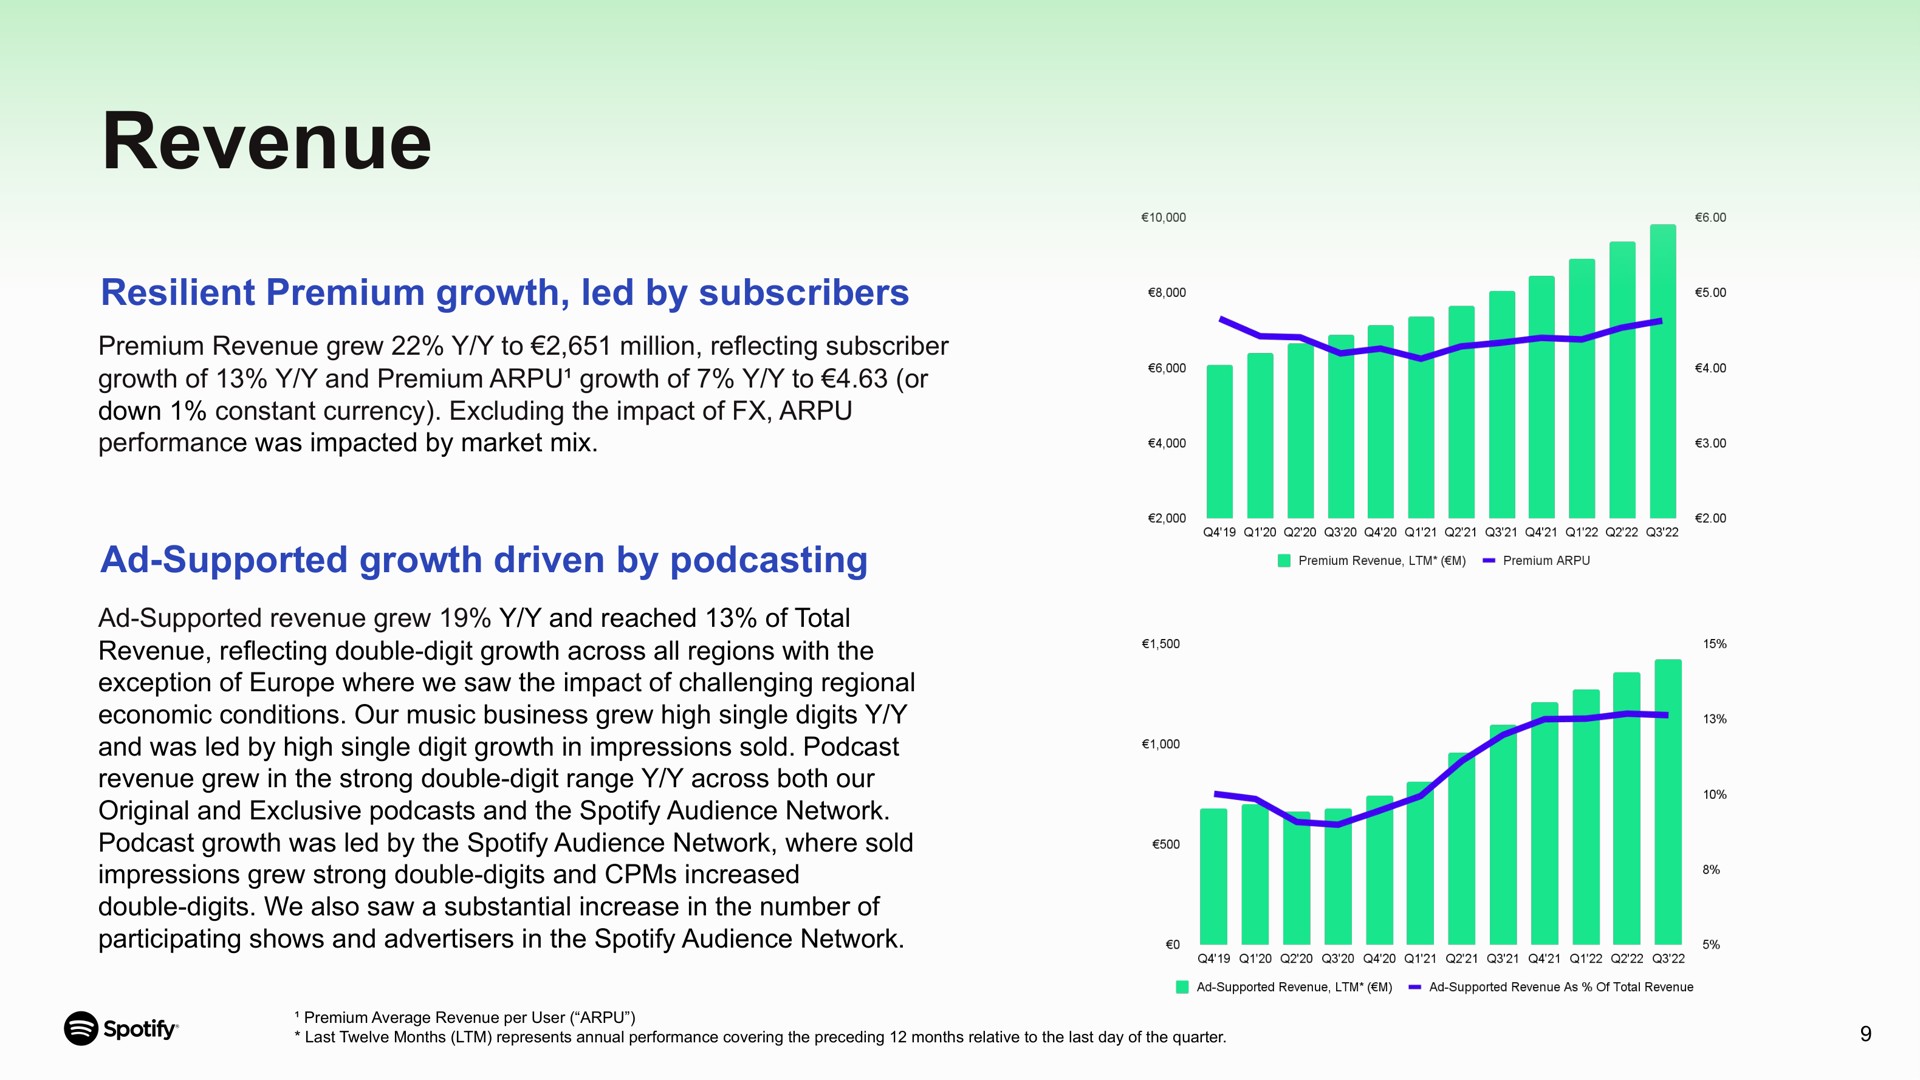 revenue resilient premium growth led by subscribers supported growth driven by of and of to or down constant currency excluding the impact of performance was impacted market mix exception of where we saw the impact of challenging regional original and exclusive and the audience network impressions grew strong double digits and increased | Spotify